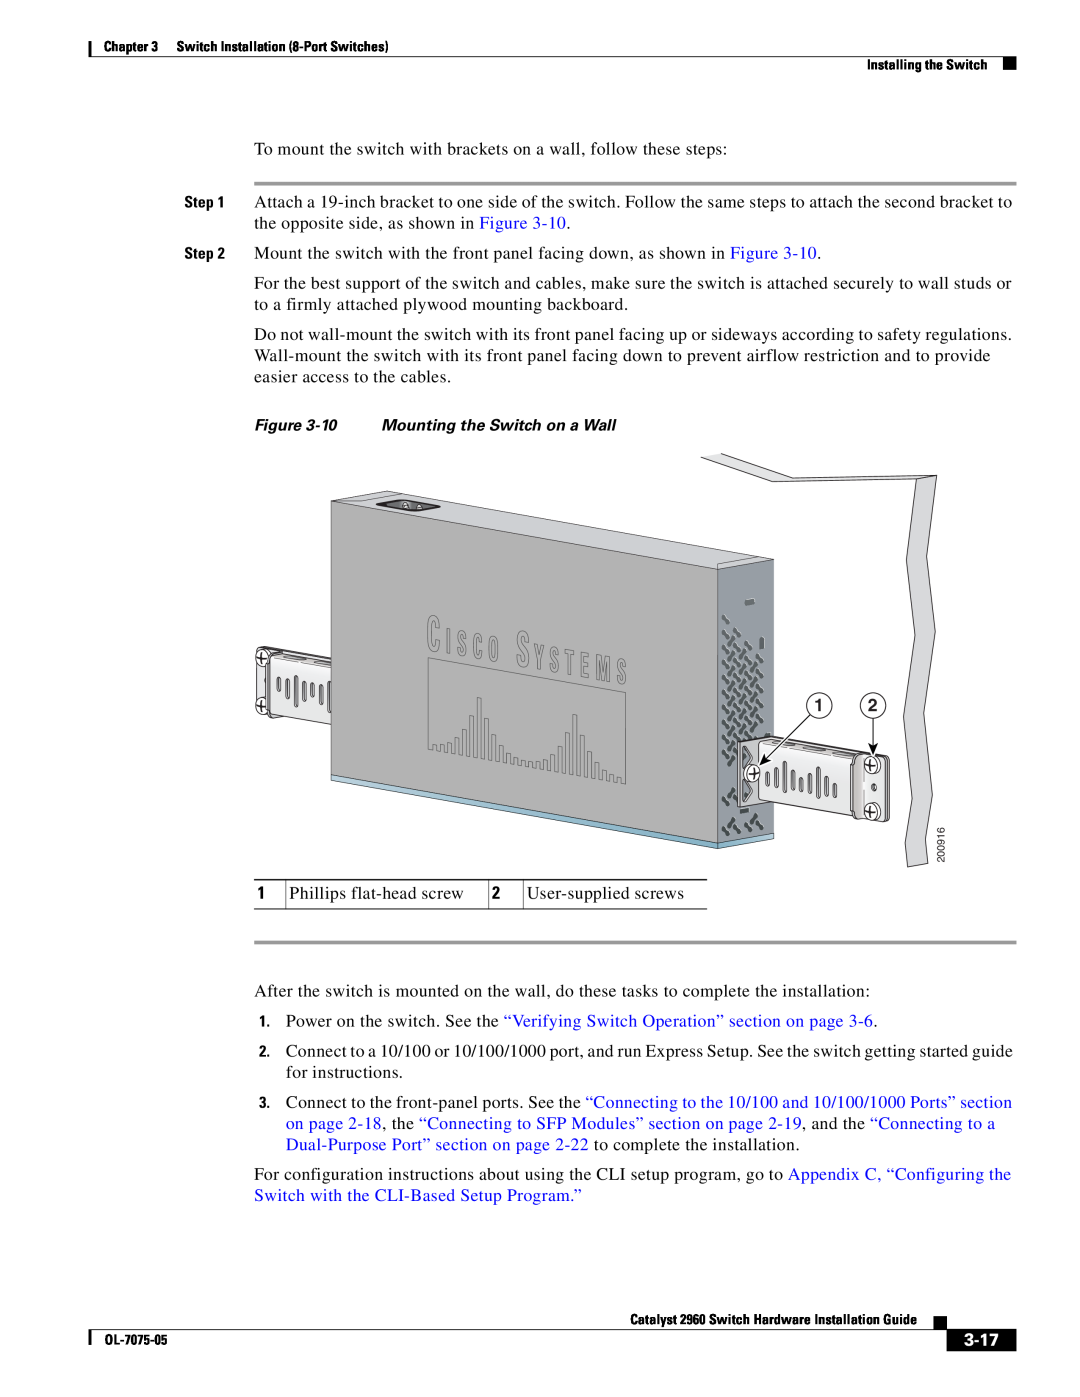 Cisco Systems 2960 specifications 3-17, 10 Mounting the Switch on a Wall 